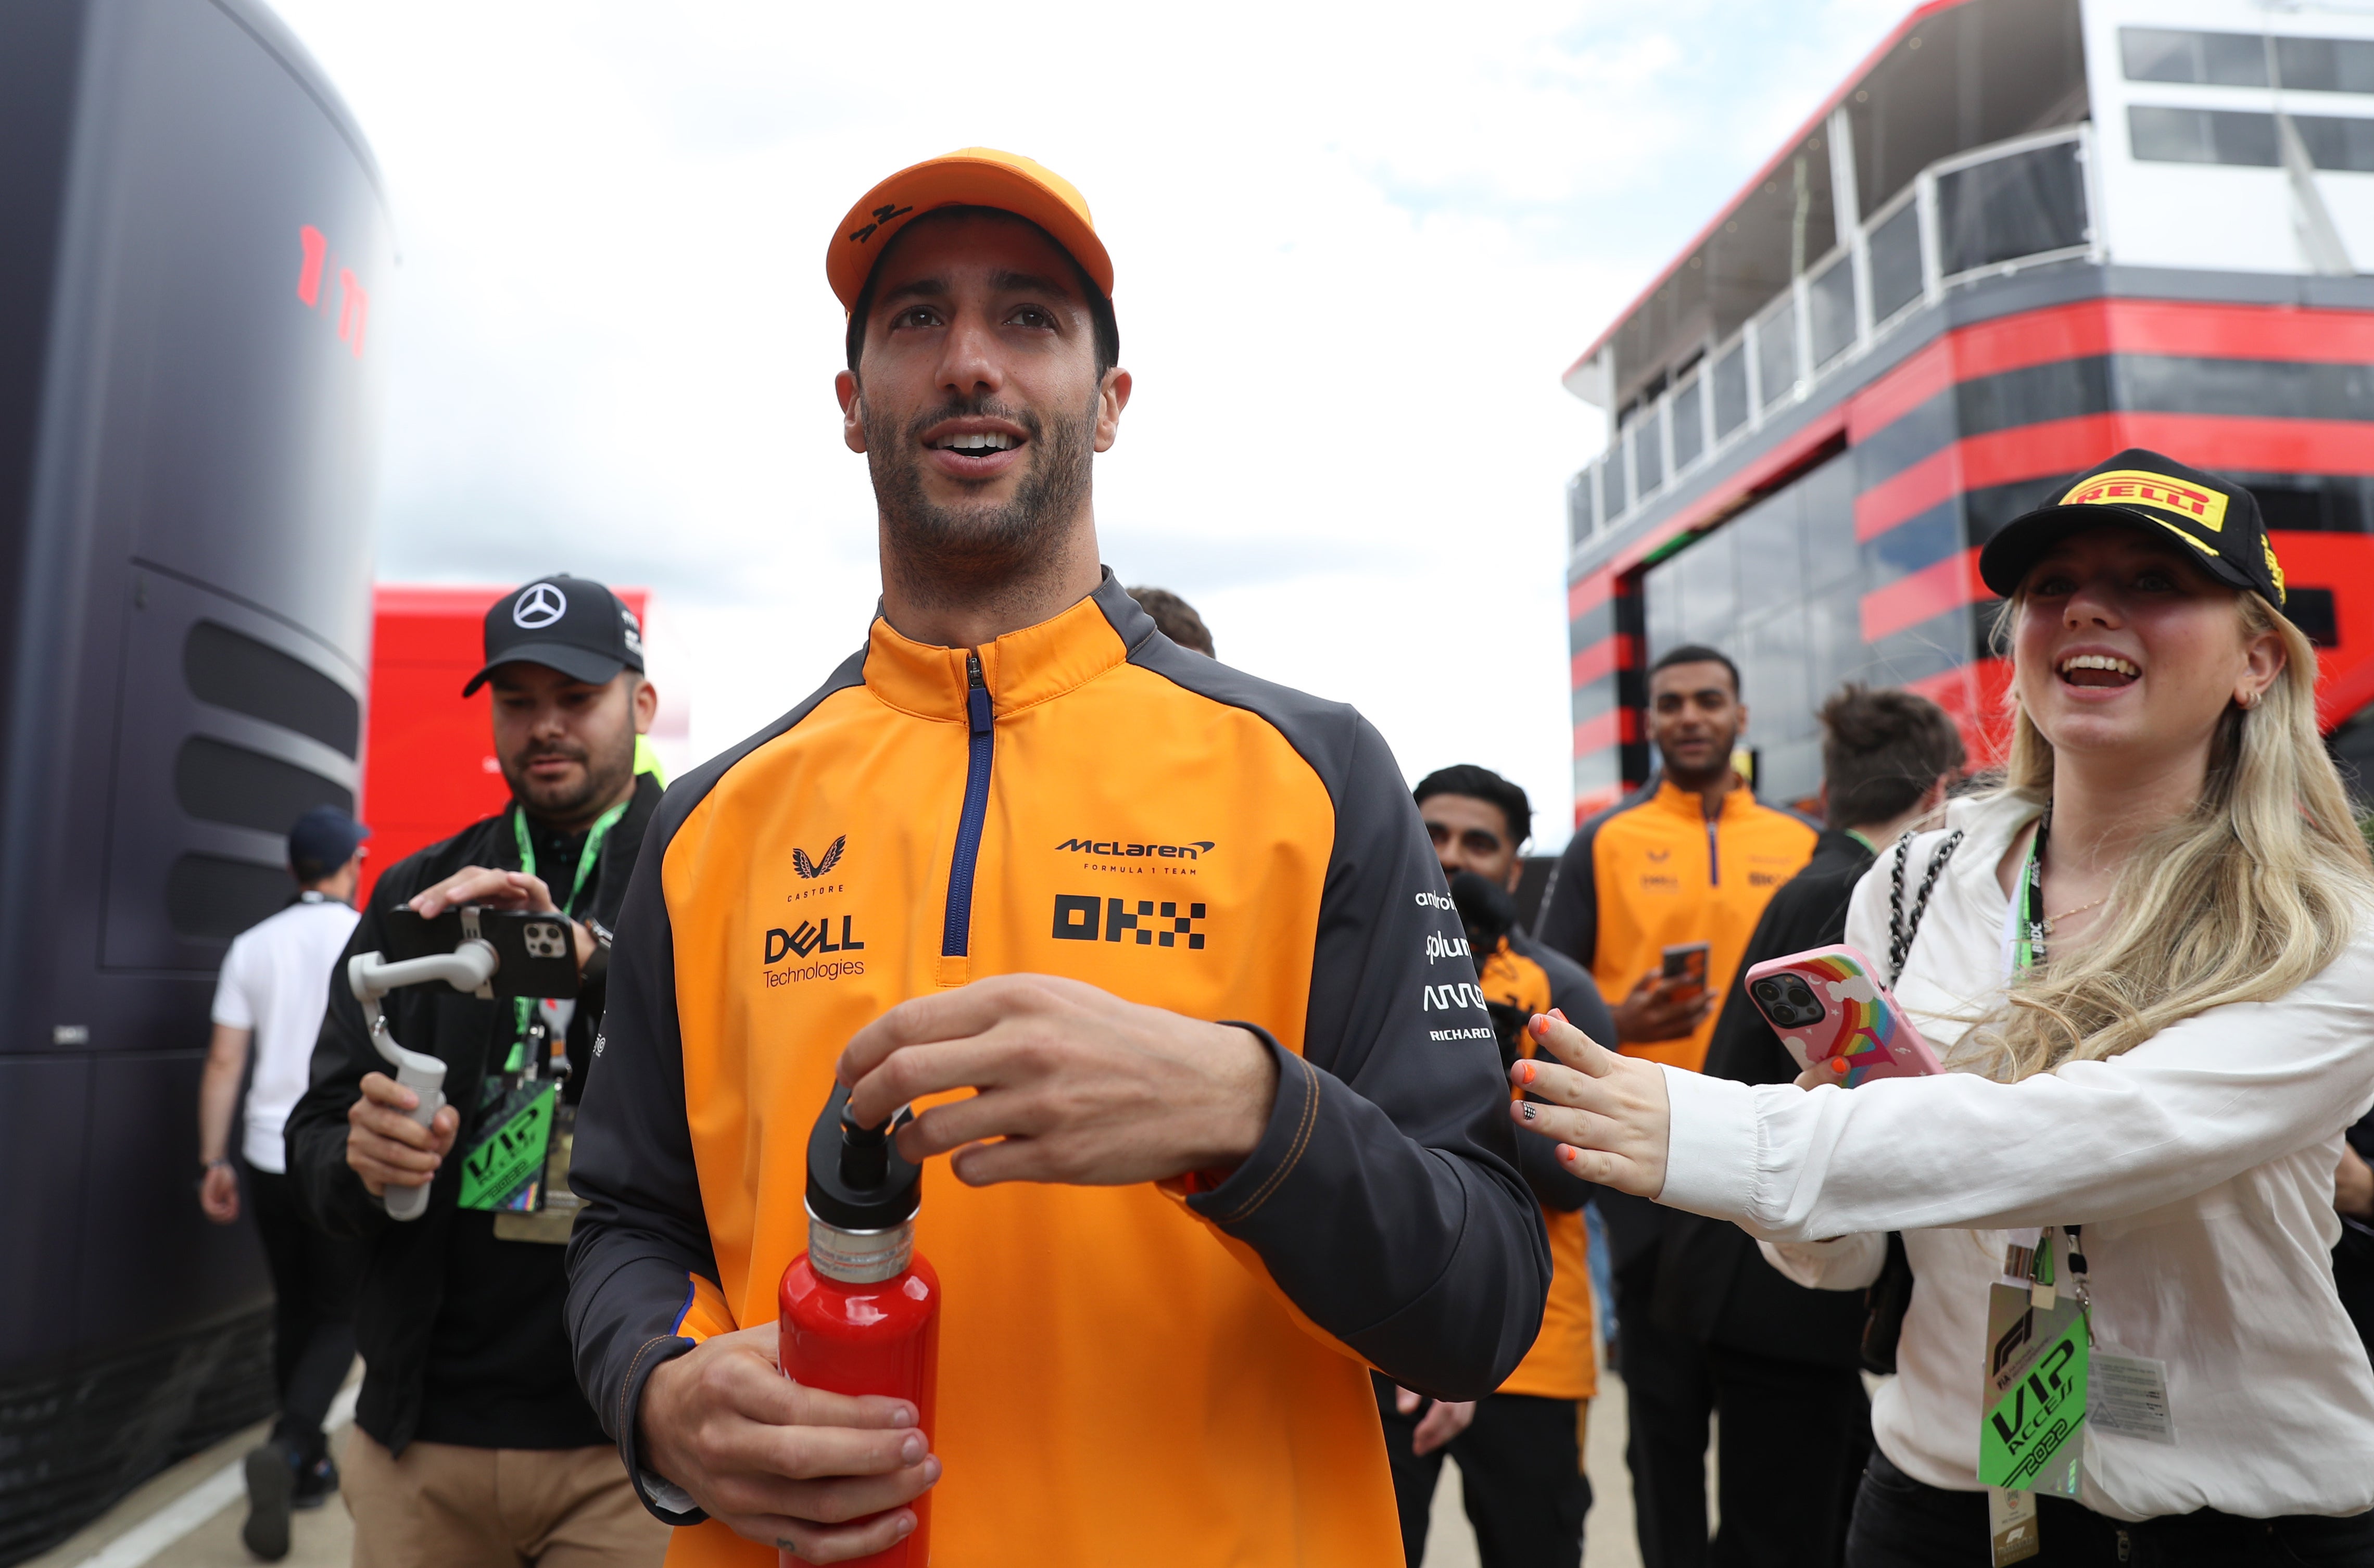 McLaren have reportedly told Daniel Ricciardo that they intend to replace him with Oscar Piastri